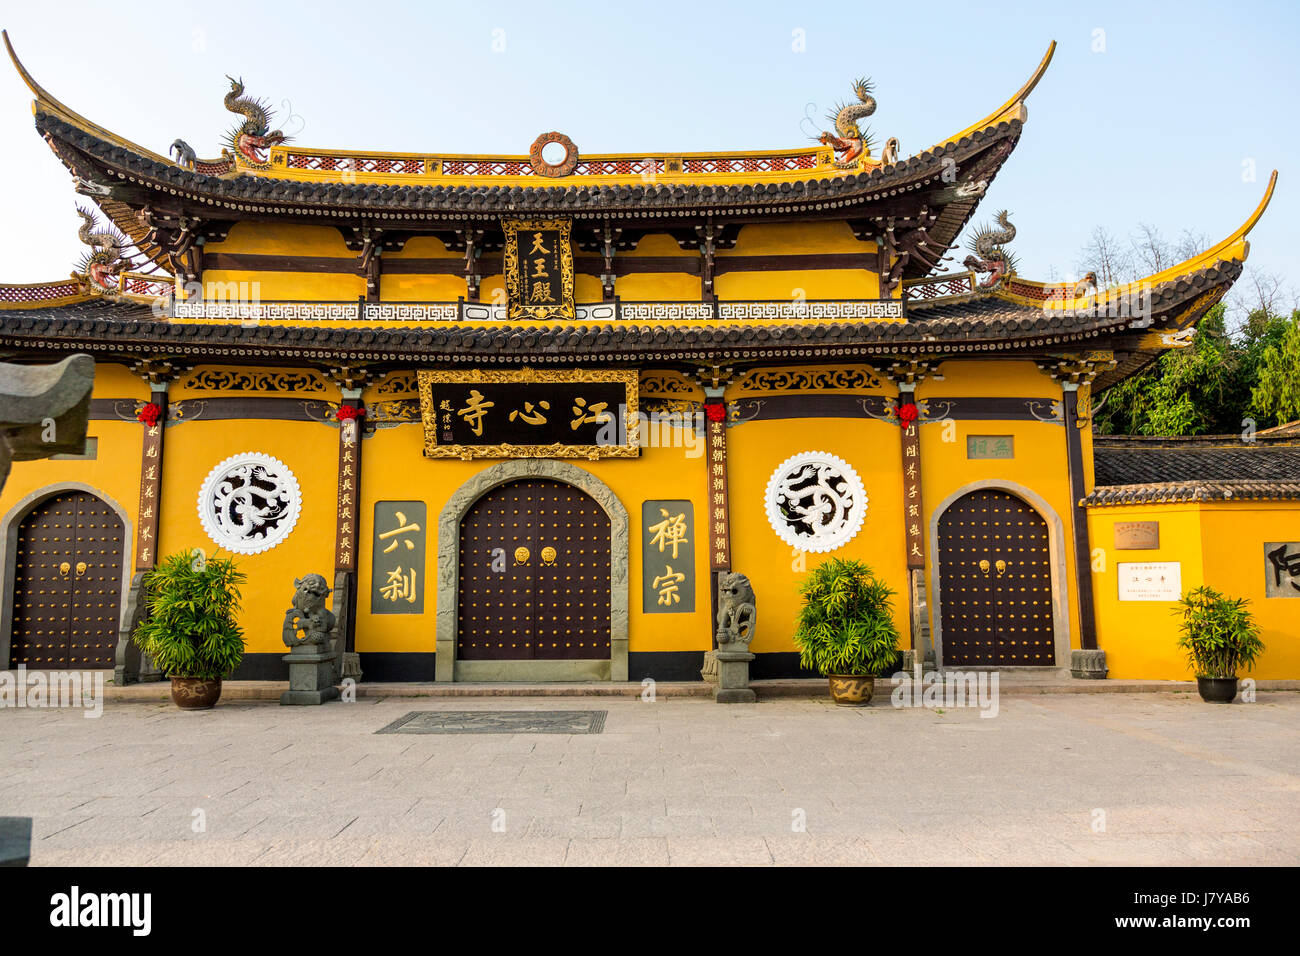 Wenzhou, Chine. Jiangxin Temple Bouddhiste. Banque D'Images